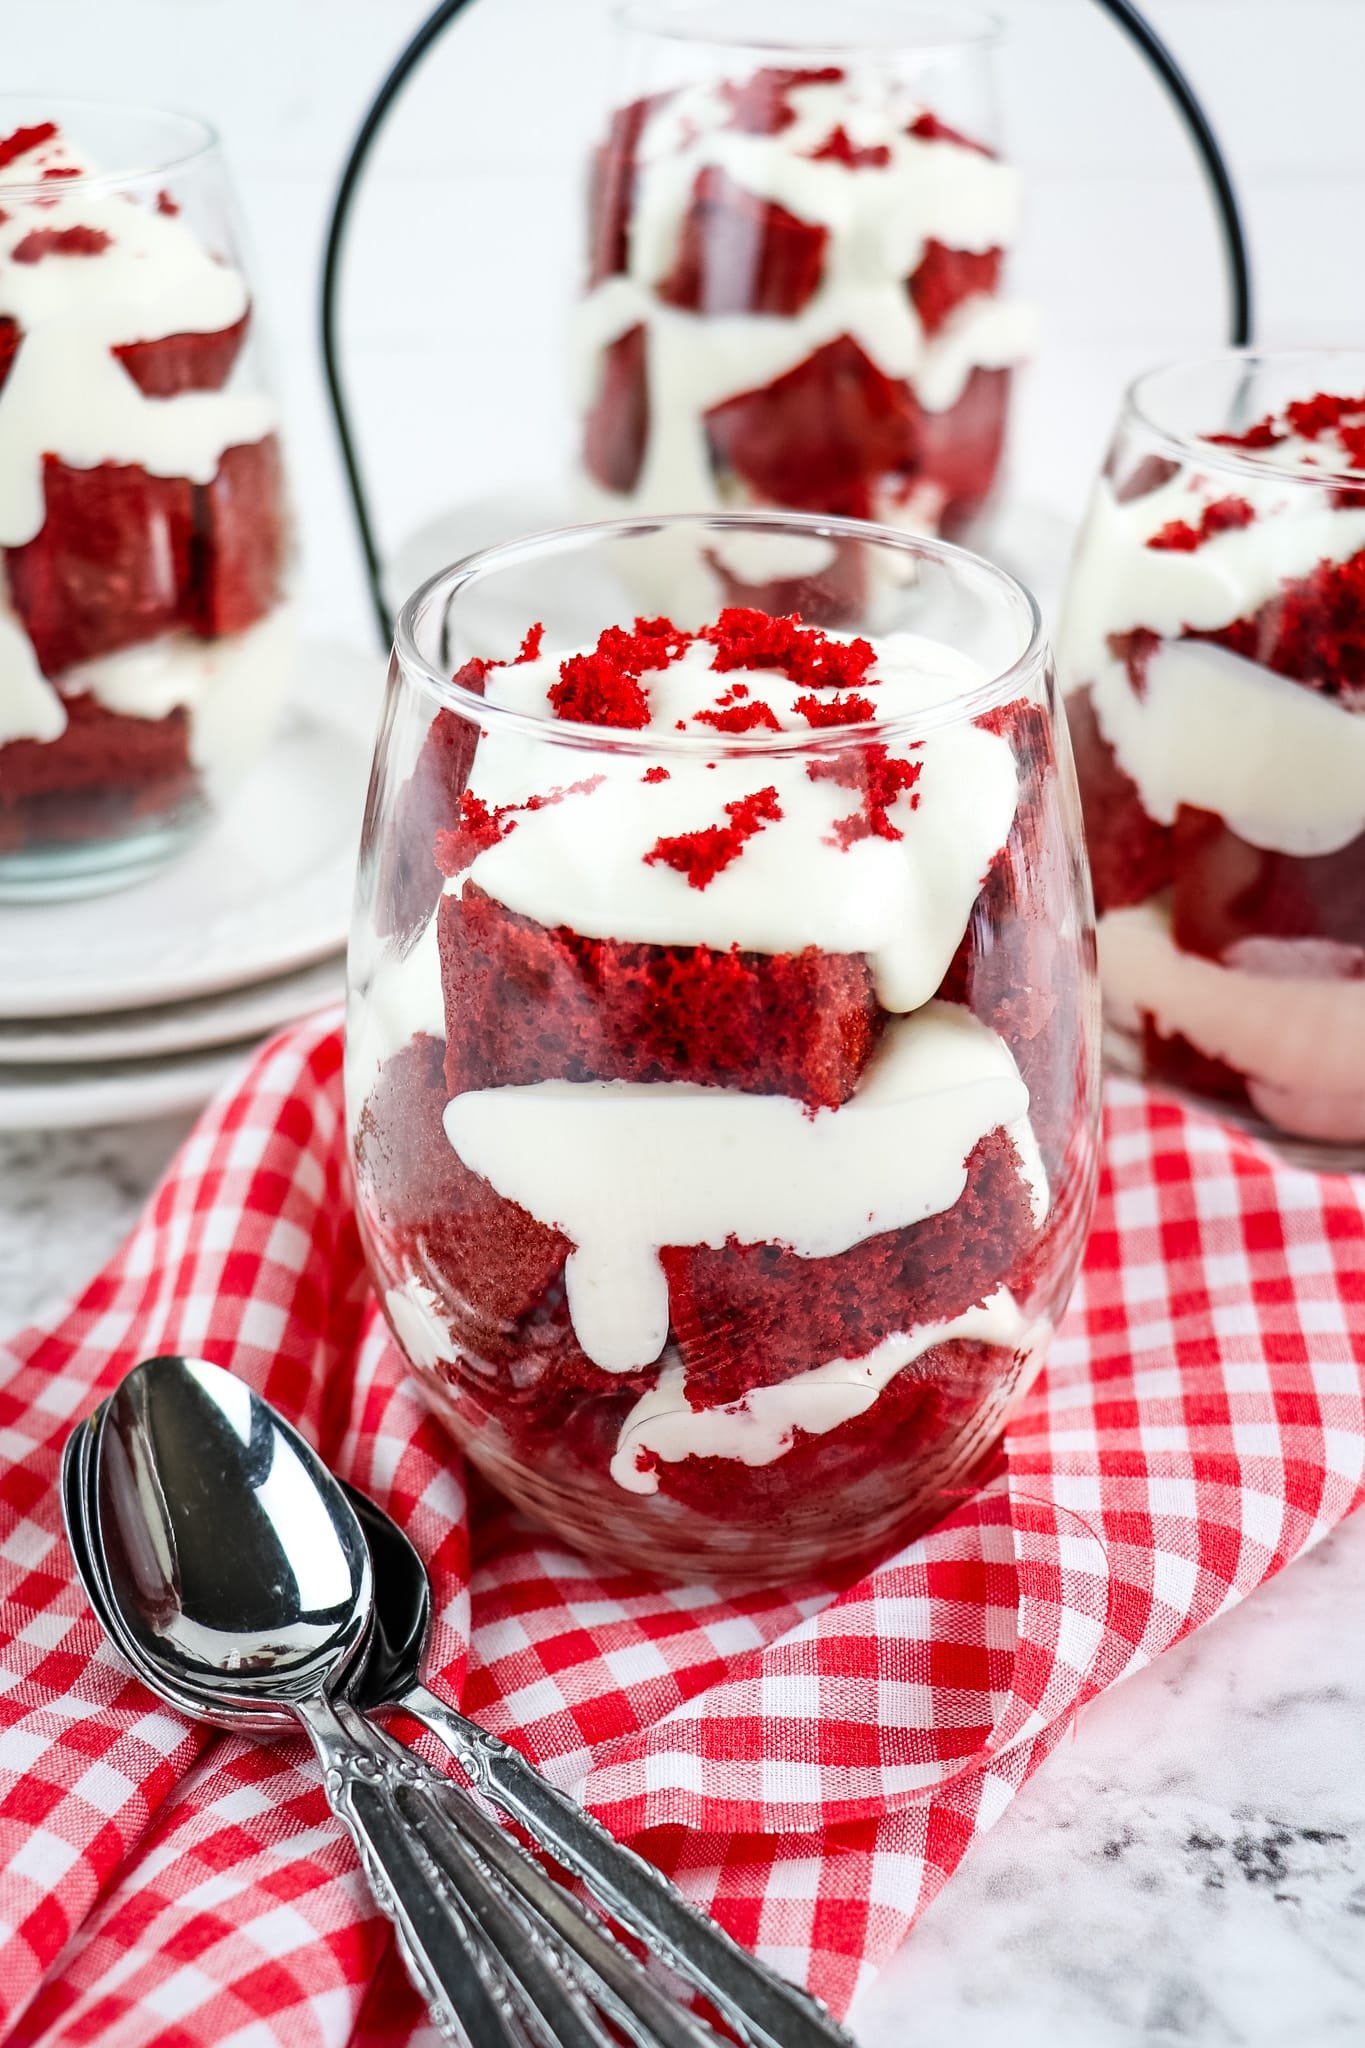 Red velvet cake parfait topped with red velvet cake crumbs with spoons on the side.